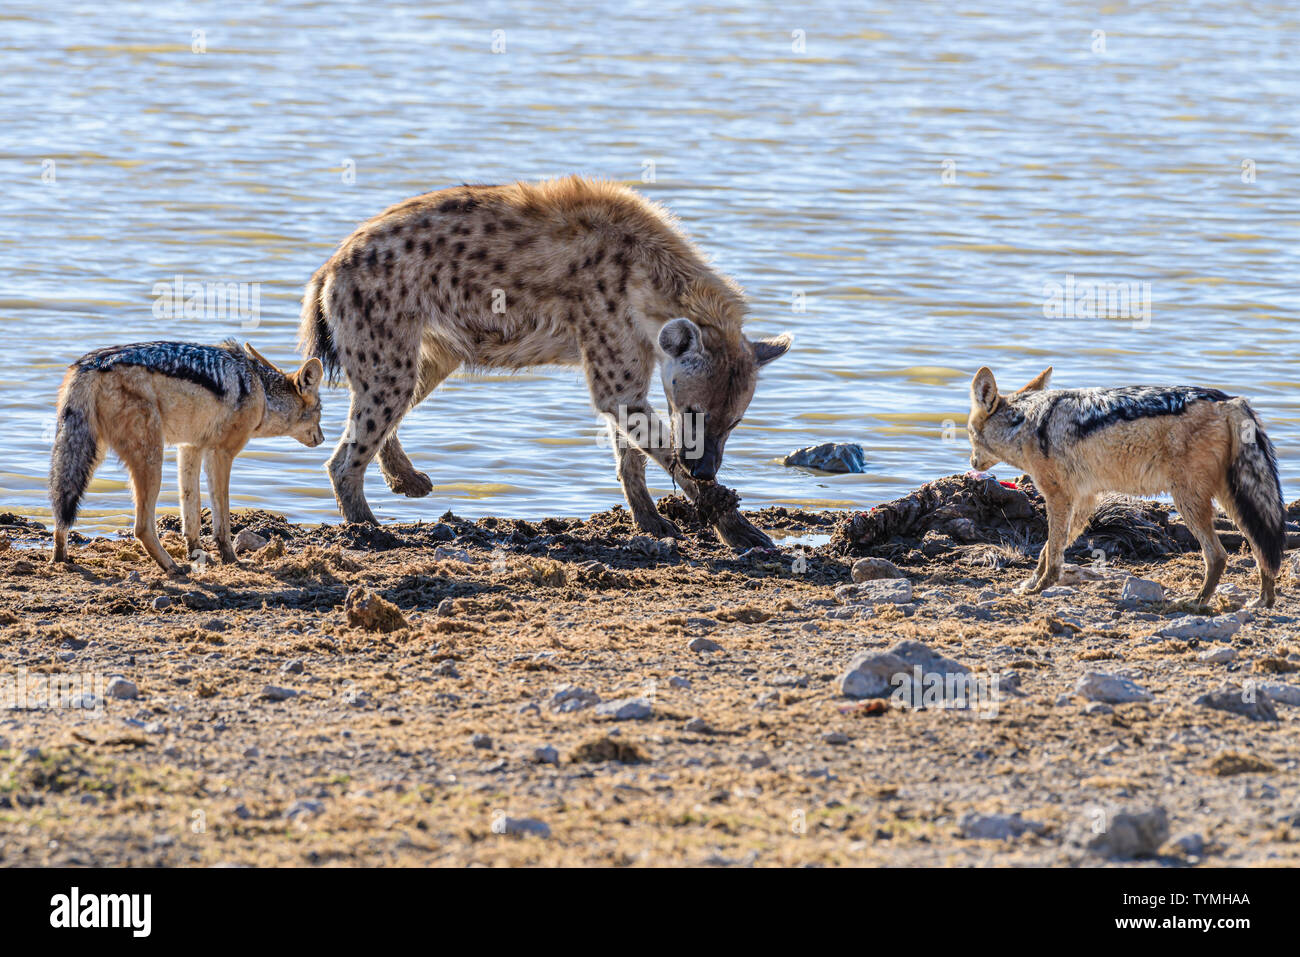 Black backed jackals harass and attempt to confuse a spotted hyena, allowing them to steal part of their kill at Etosha National Park, Namibia Stock Photo